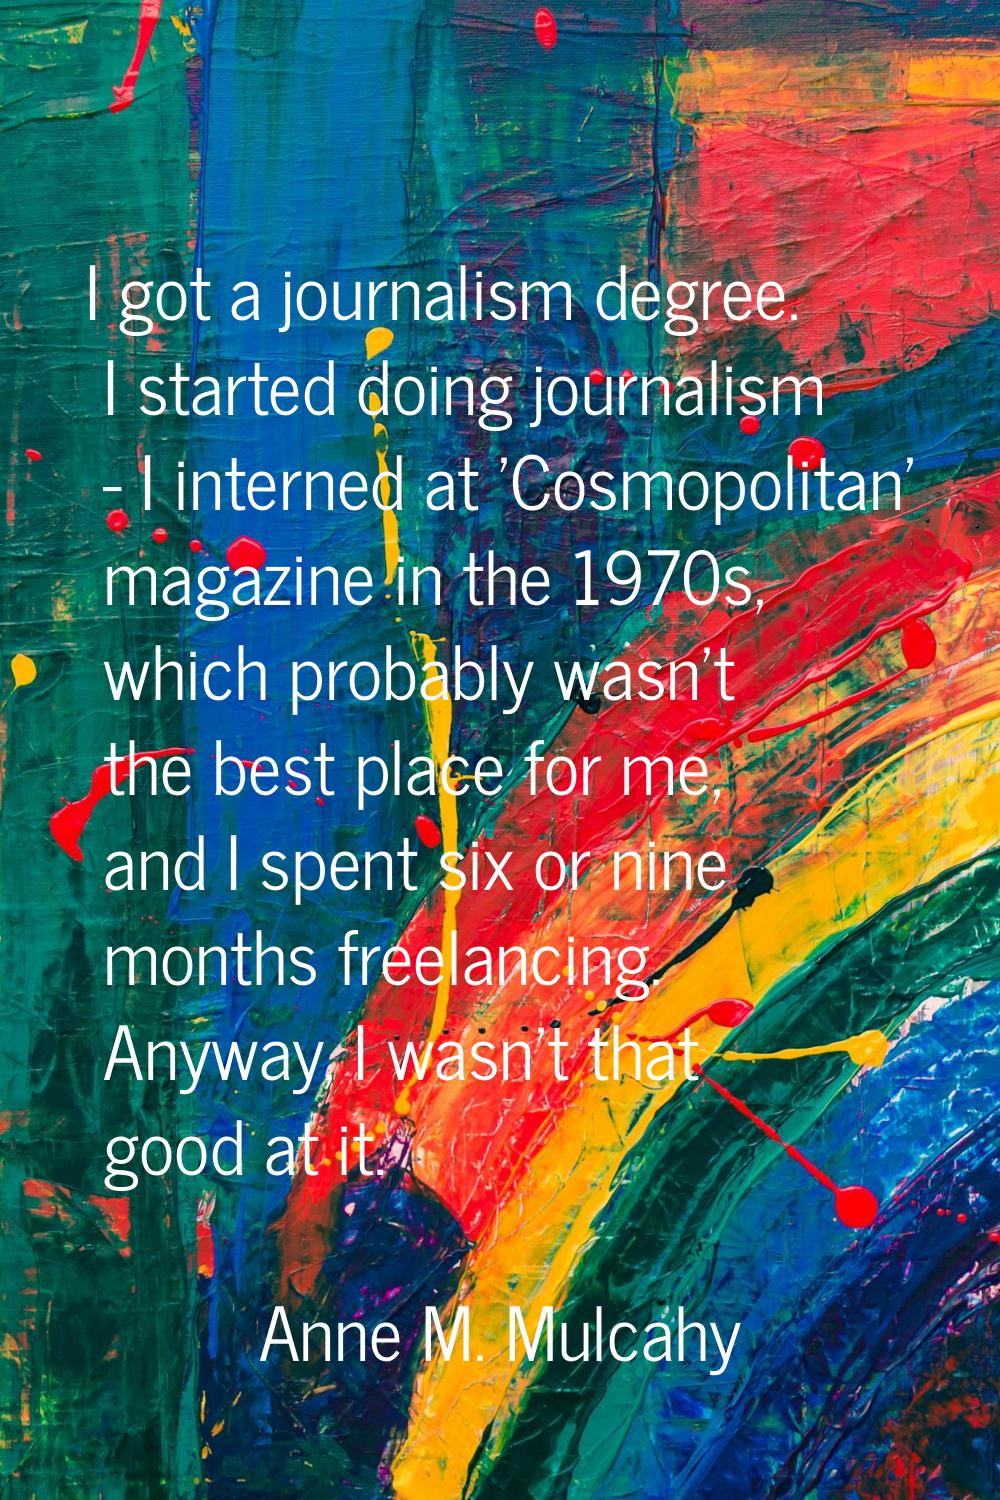 I got a journalism degree. I started doing journalism - I interned at 'Cosmopolitan' magazine in th